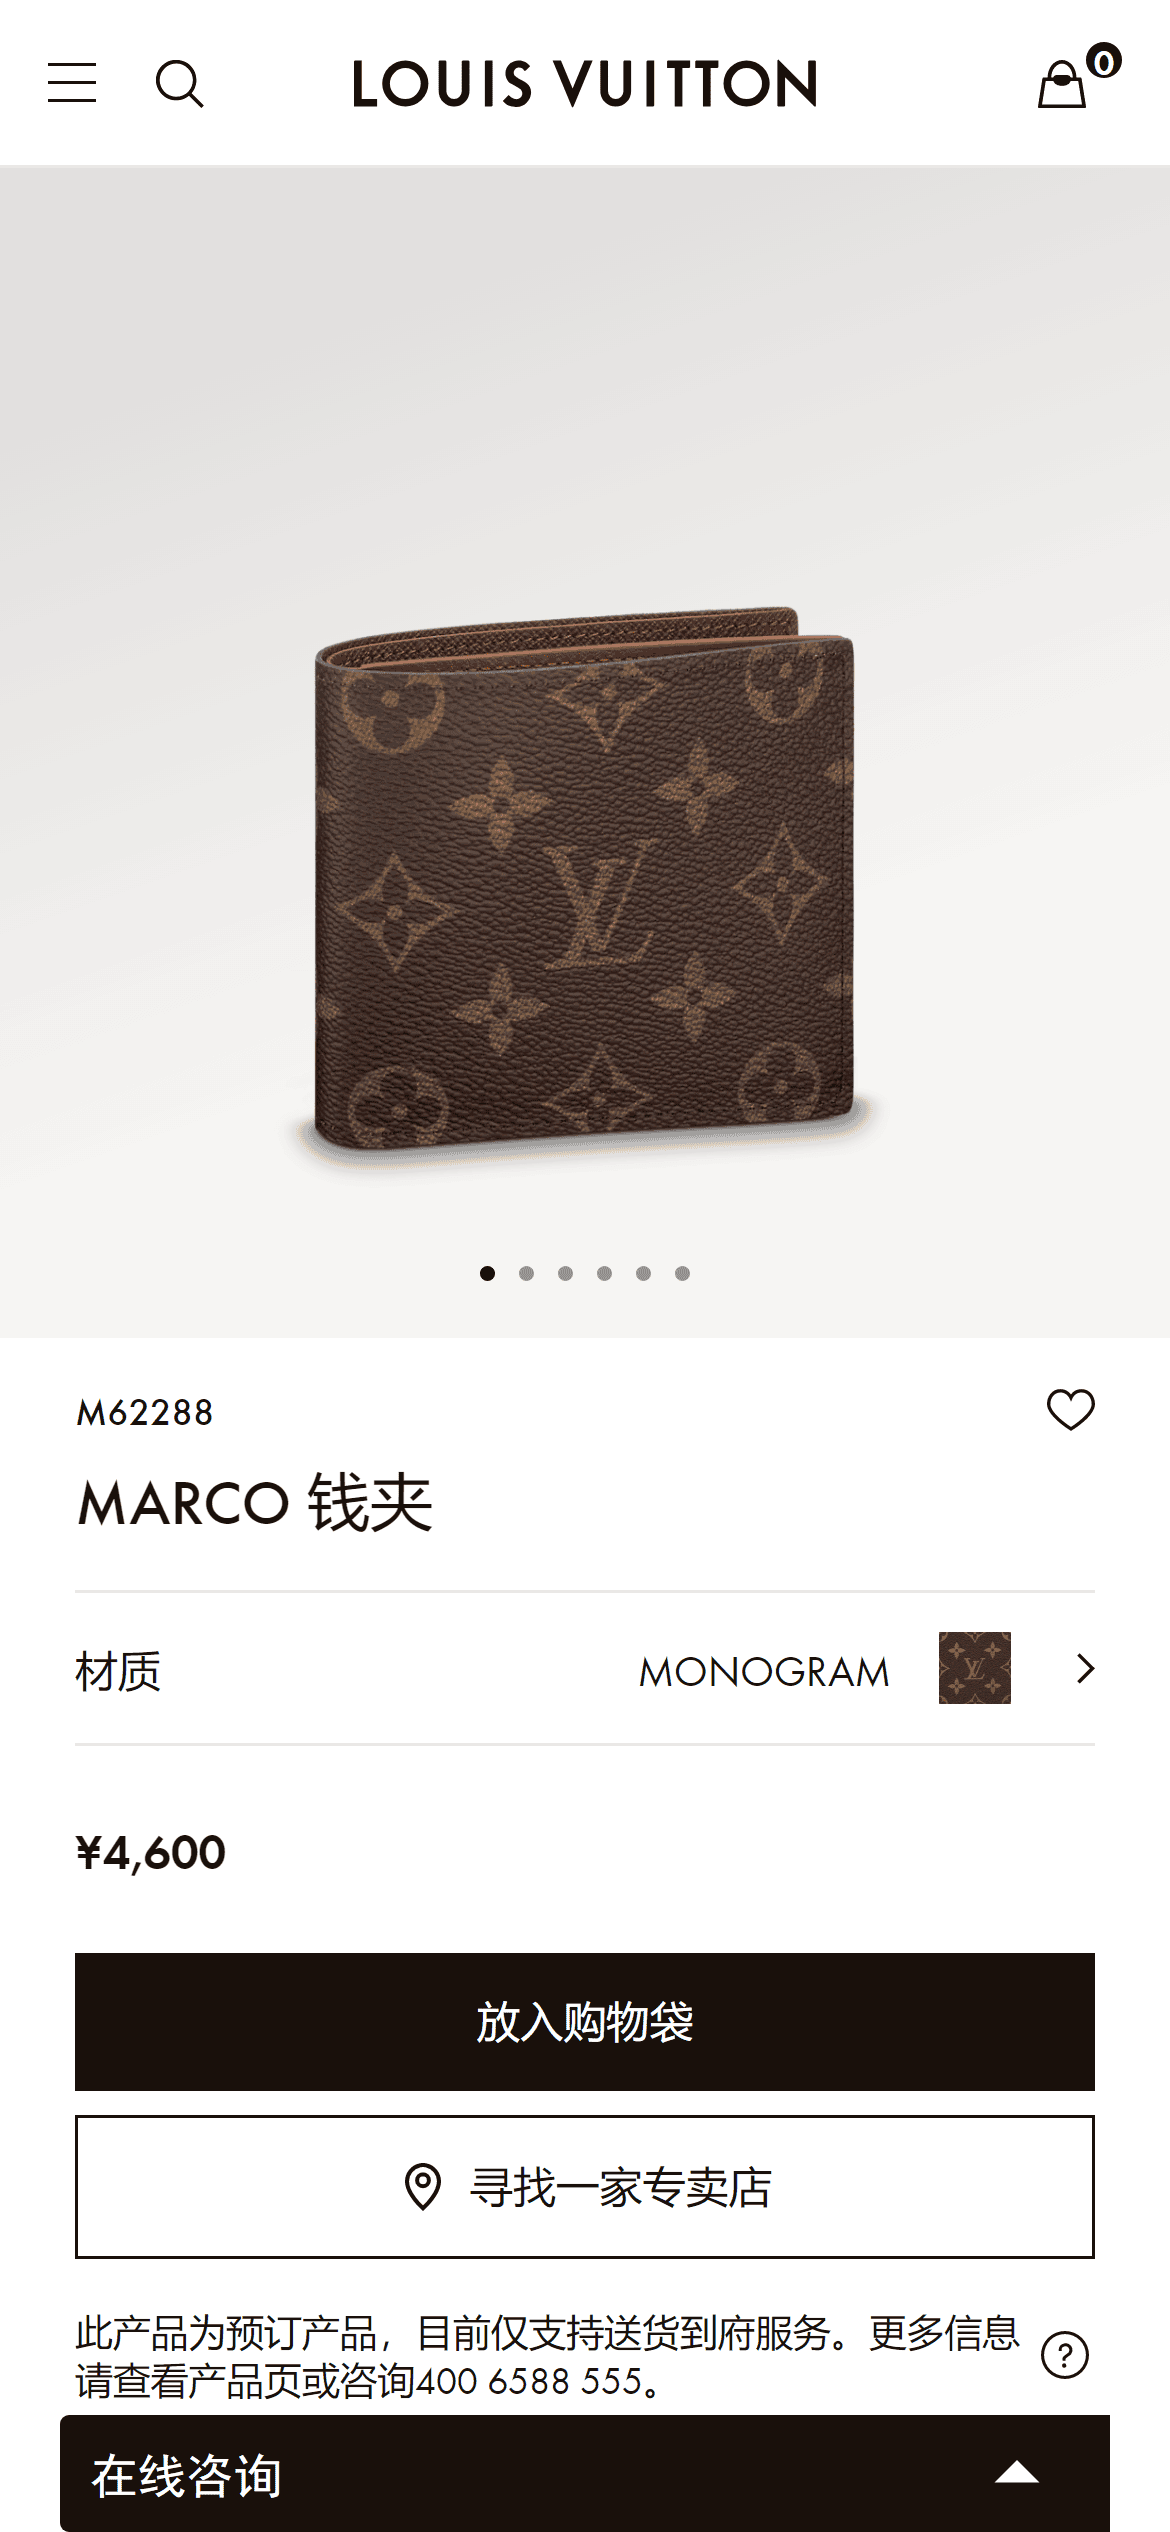 www.louisvuitton.cn_zhs-cn_products_marco-wallet-monogram-nvprod530205v_M62288iPhone-12-Pro.png